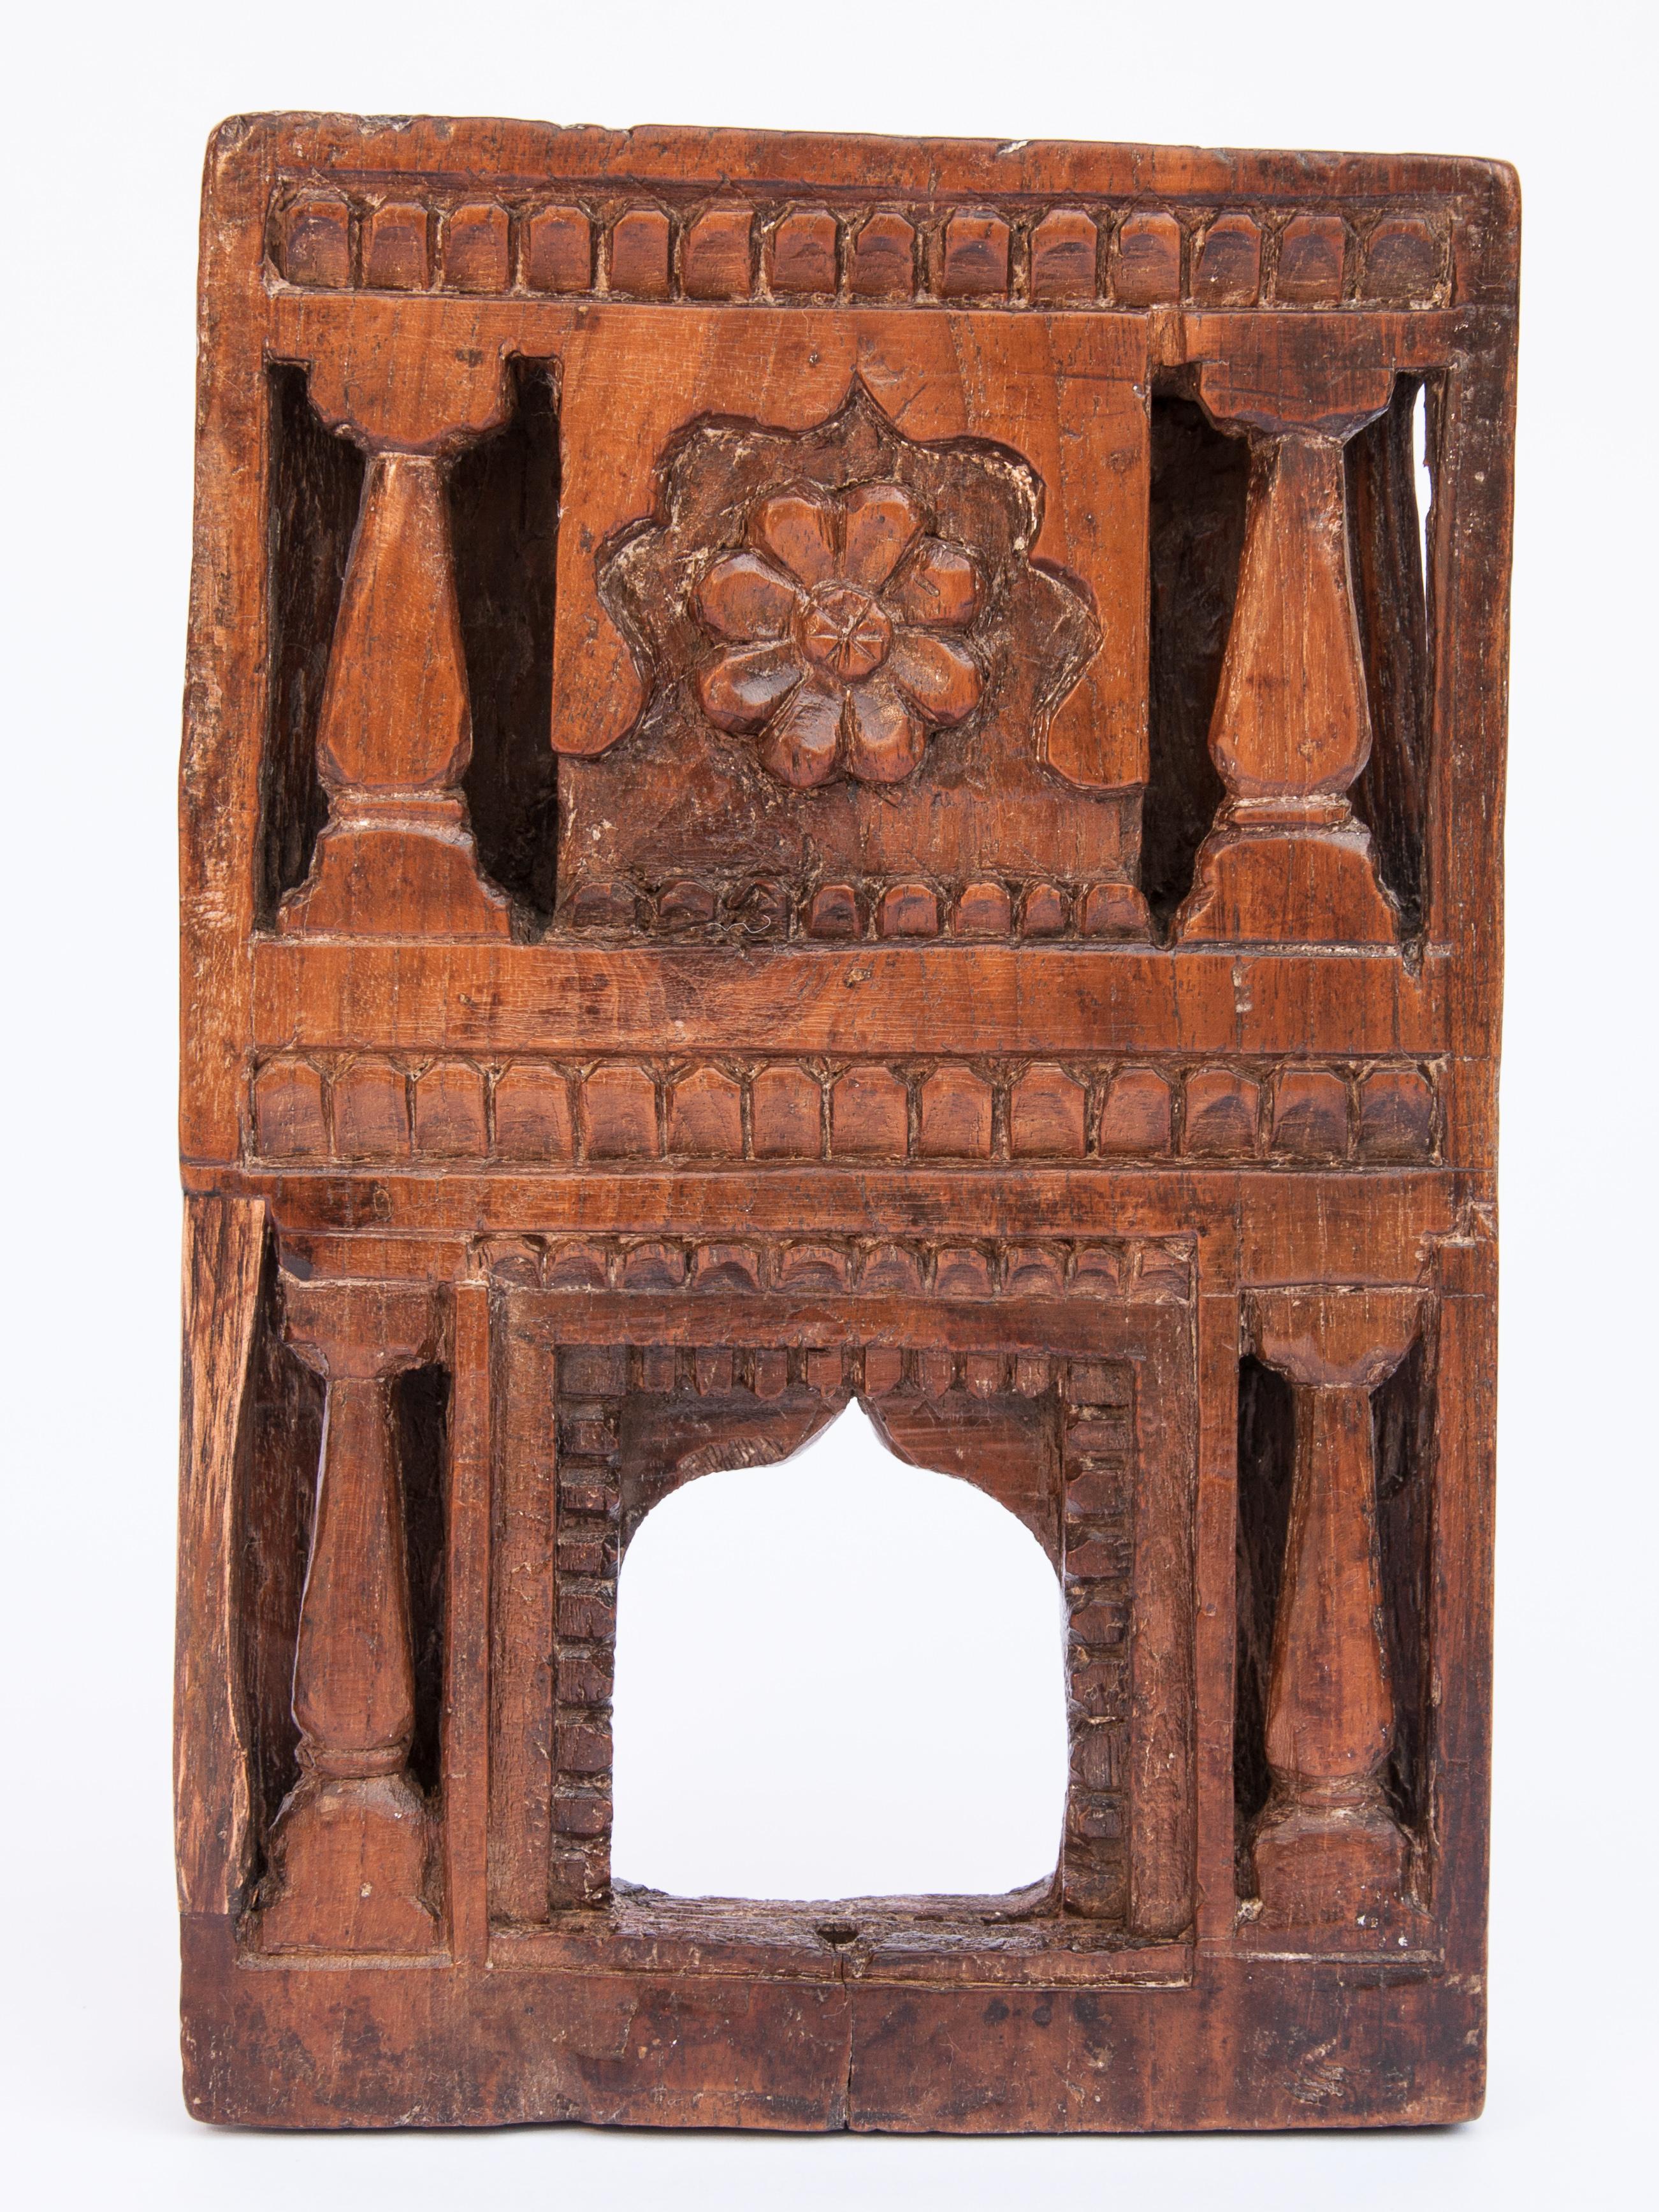 Vintage miniature architectural votive or picture frame. Mid-20th century, India. Wooden, hand carved, mid-20th century. Measures approx: 6 inches wide x 9 inches high. 
This vintage hand carved wooden frame, from South India, is basically a rustic